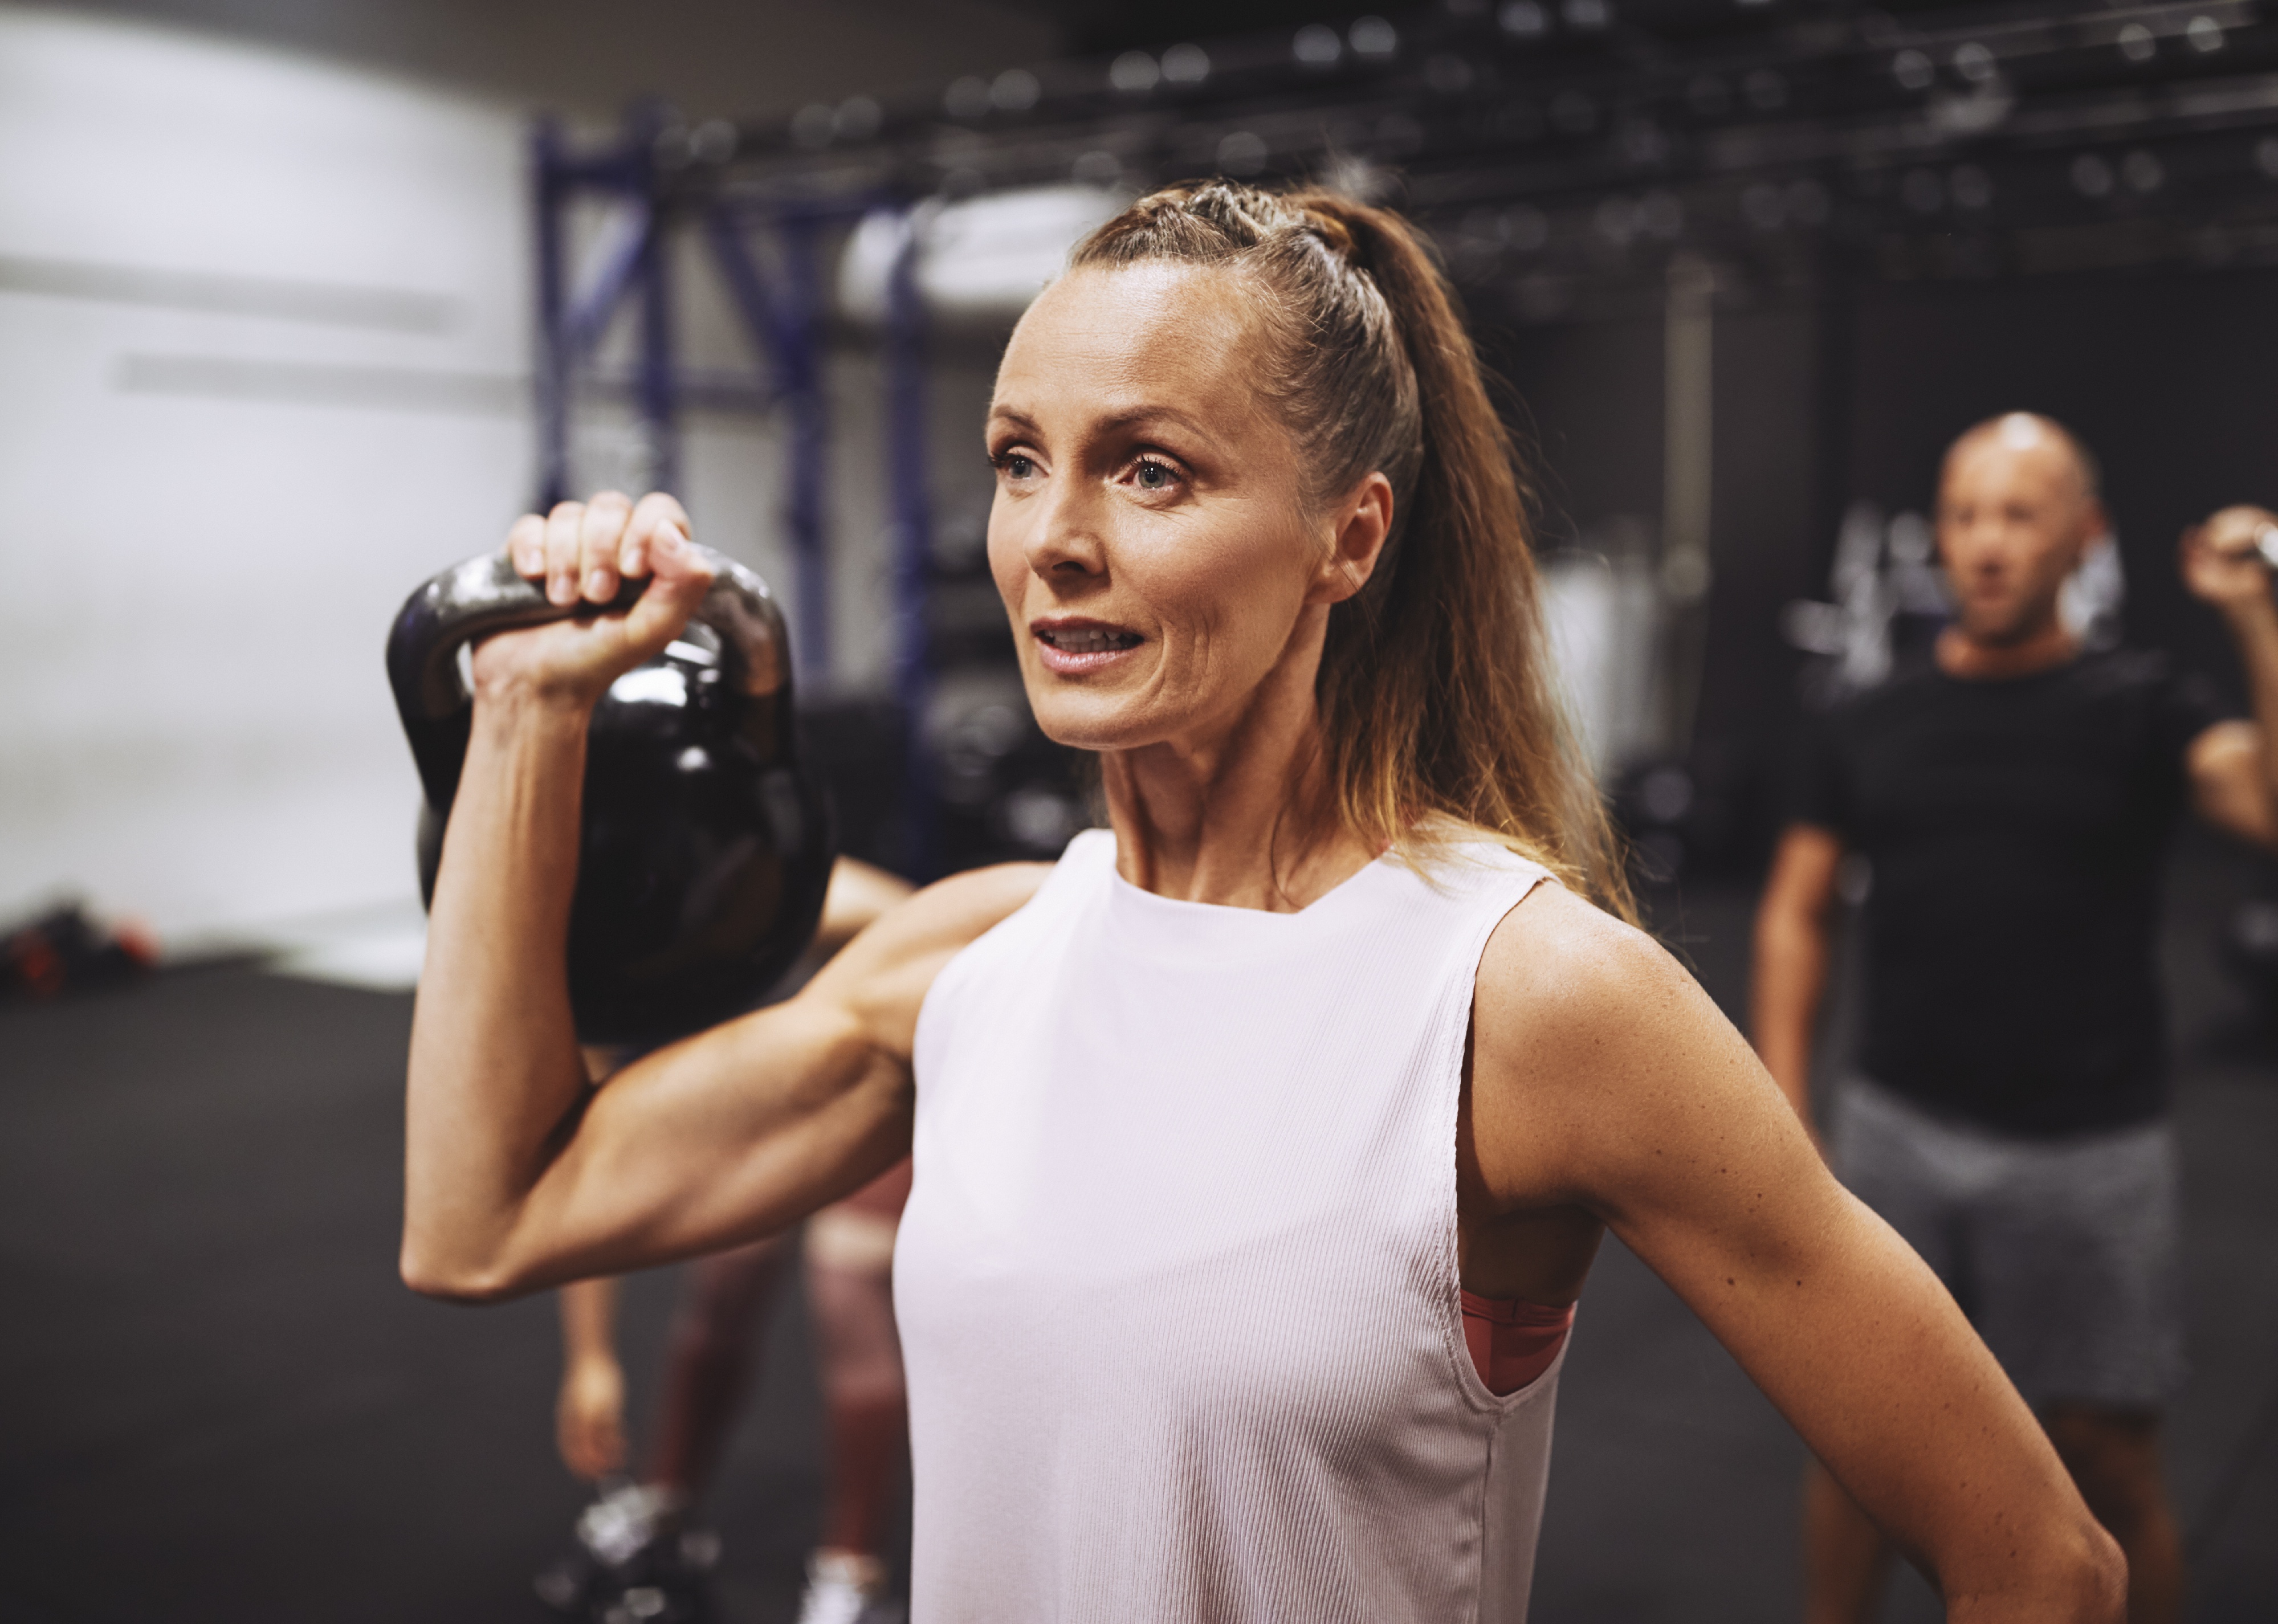 Woman in sportswear lifting a dumbbell during a strength training session at a gym.